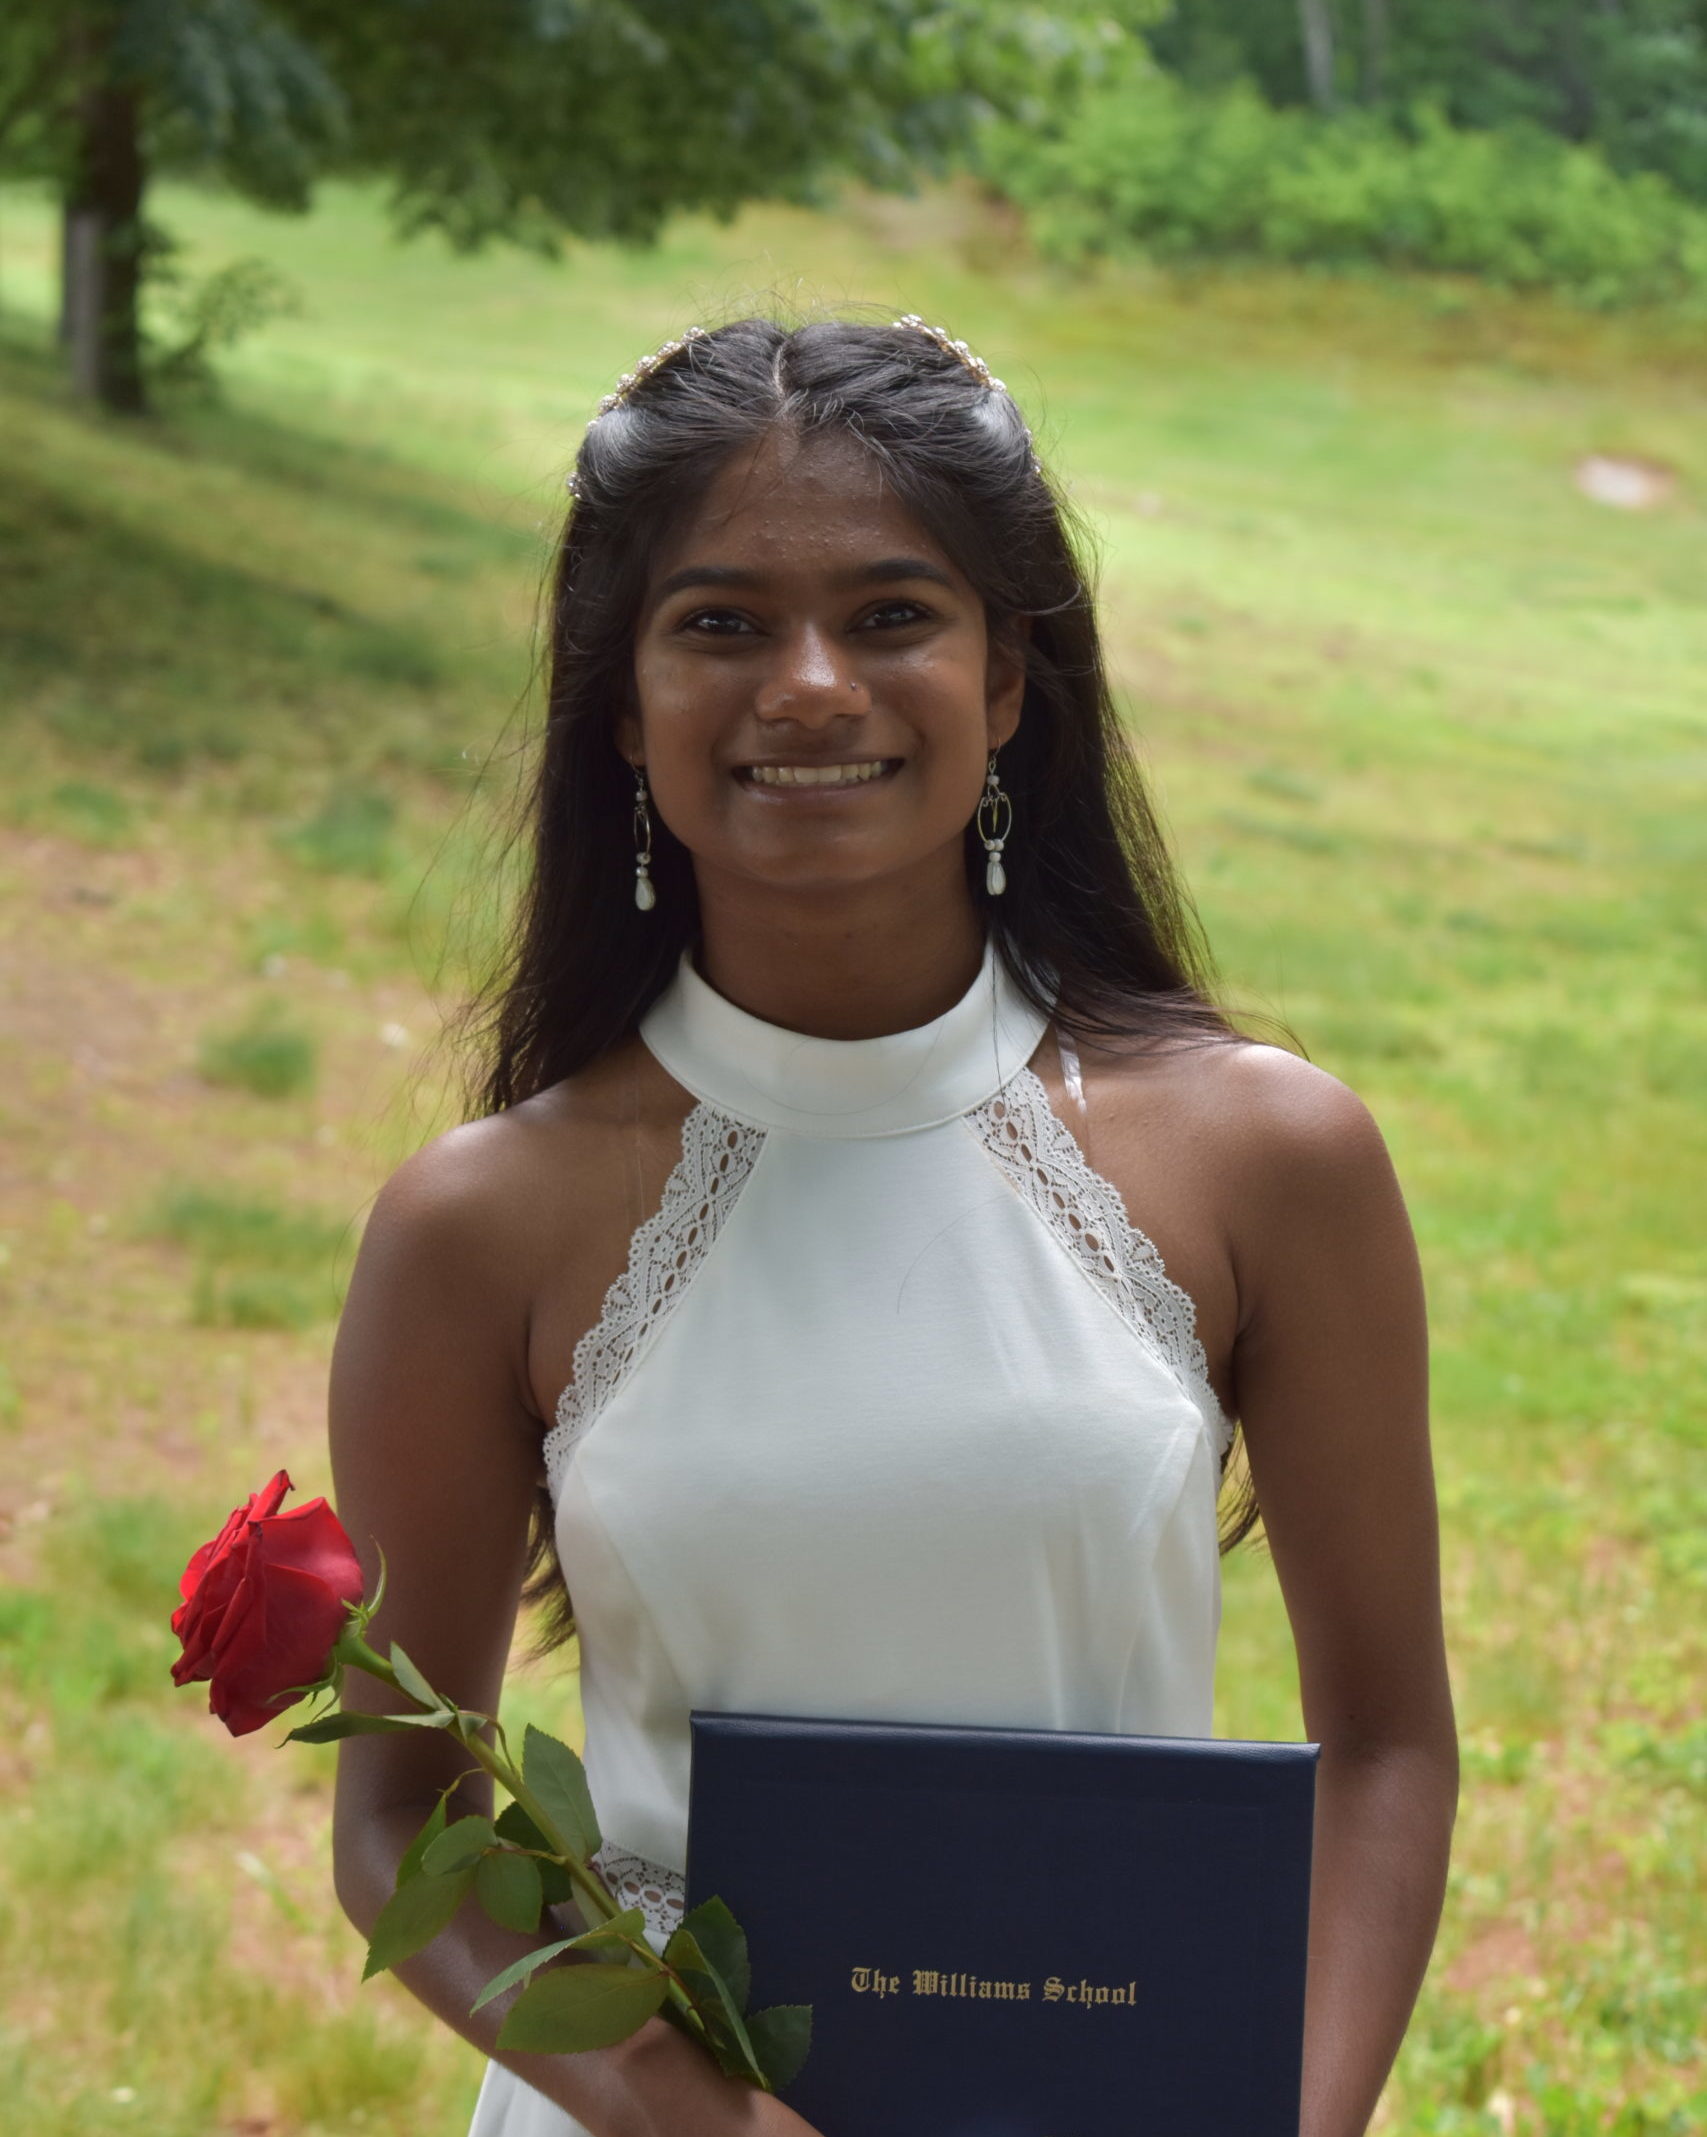 smiling girl wearing white dress and standing in park holding red rose and diploma